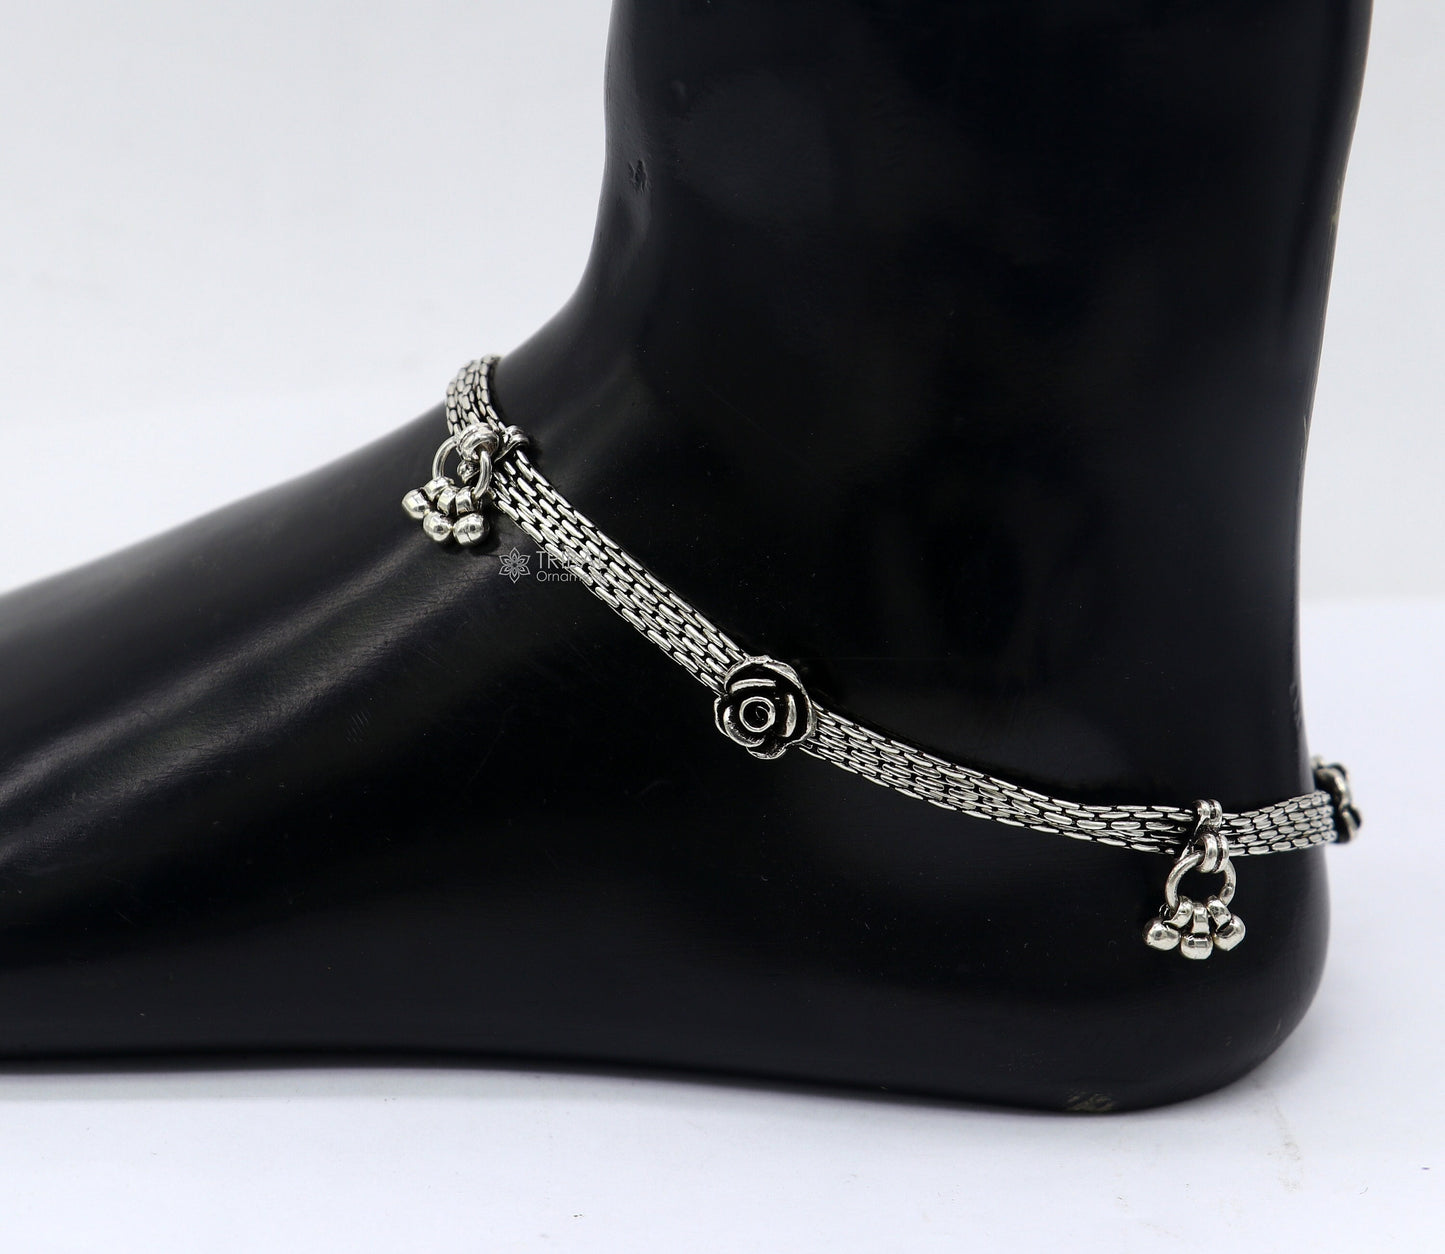 10.5" inches 925 Sterling silver vintage rose flower design 4 line  anklets foot bracelet with gorgeous hangings charm jewelry  ank617 - TRIBAL ORNAMENTS